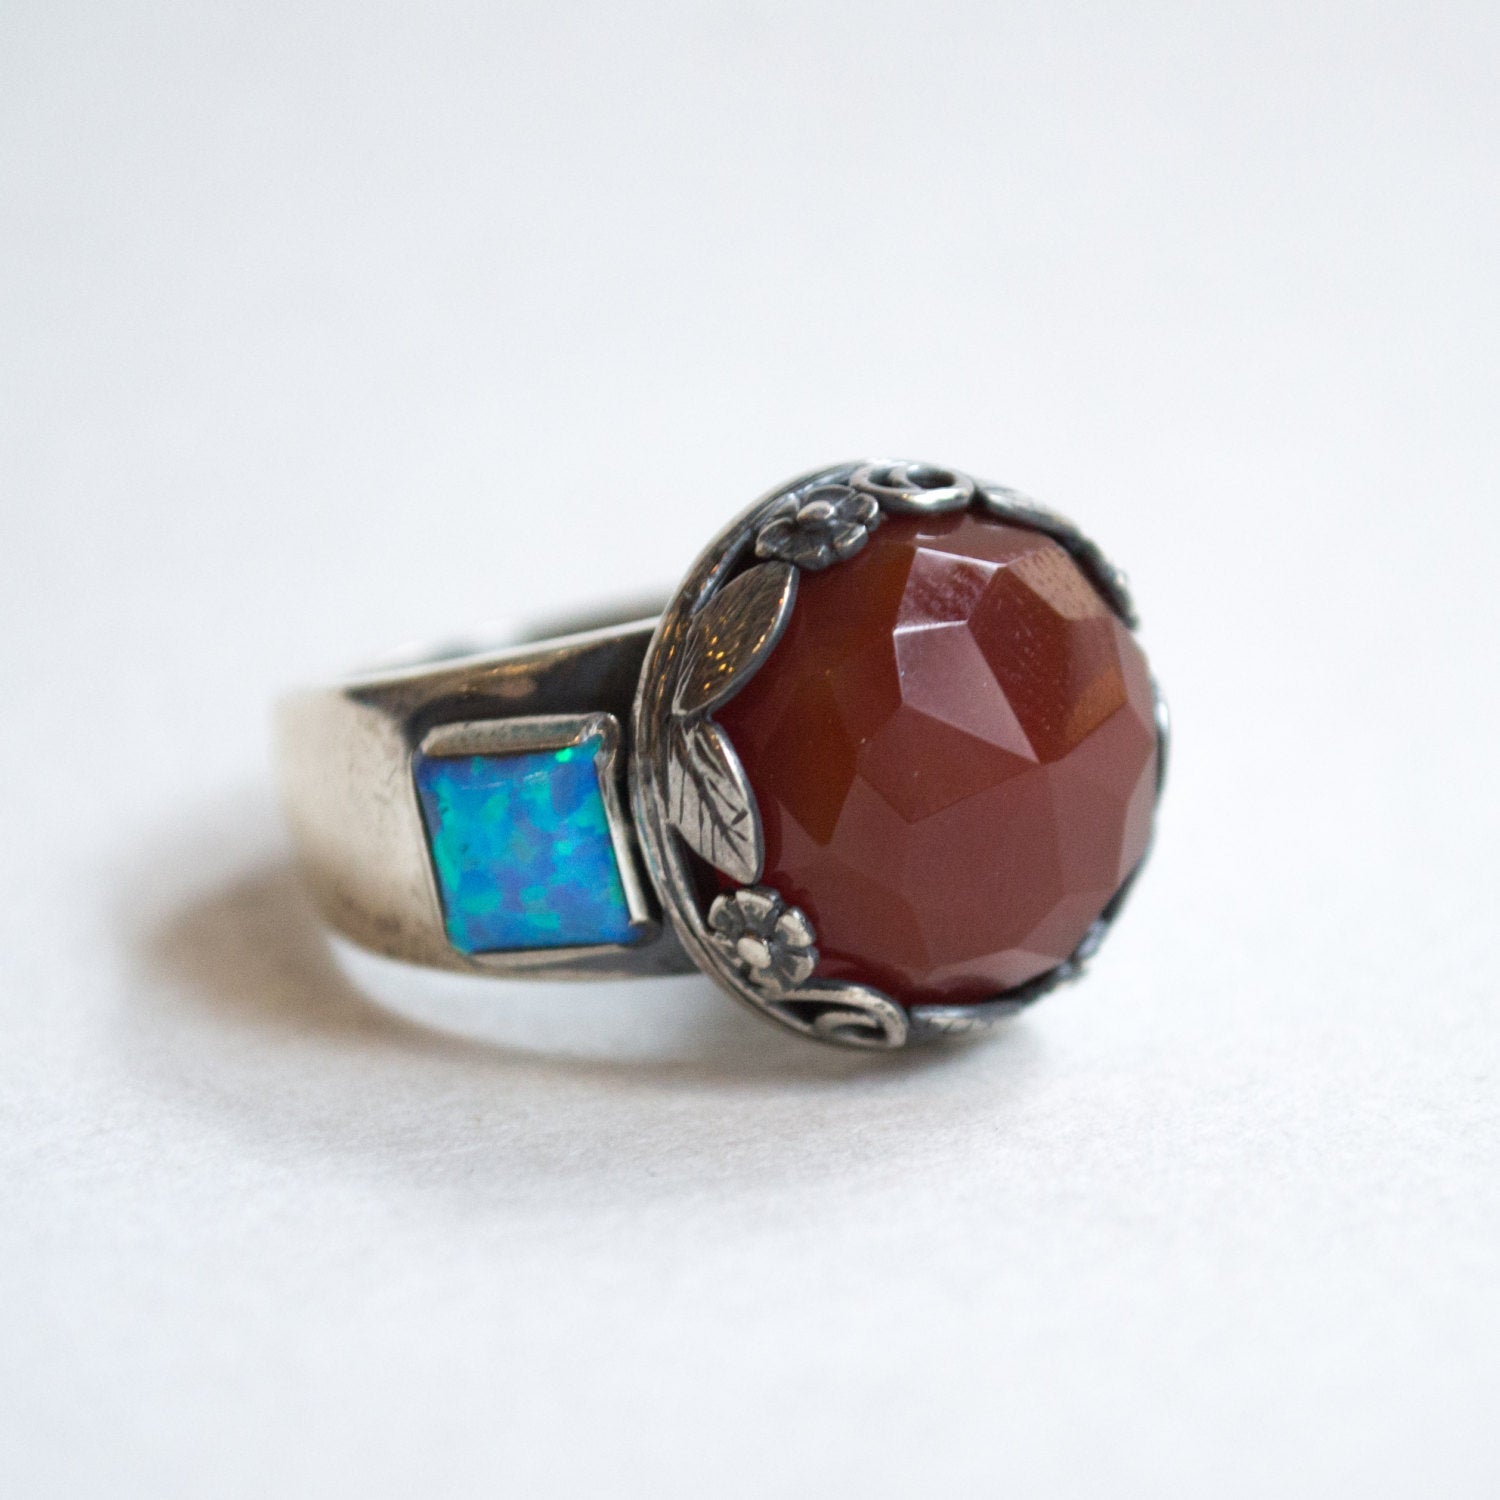 Carnelian ring,  silver ring, multi stone ring, opal ring, Boho ring, gypsy ring, bohemian ring, stone ring - The way I look at you  R2265